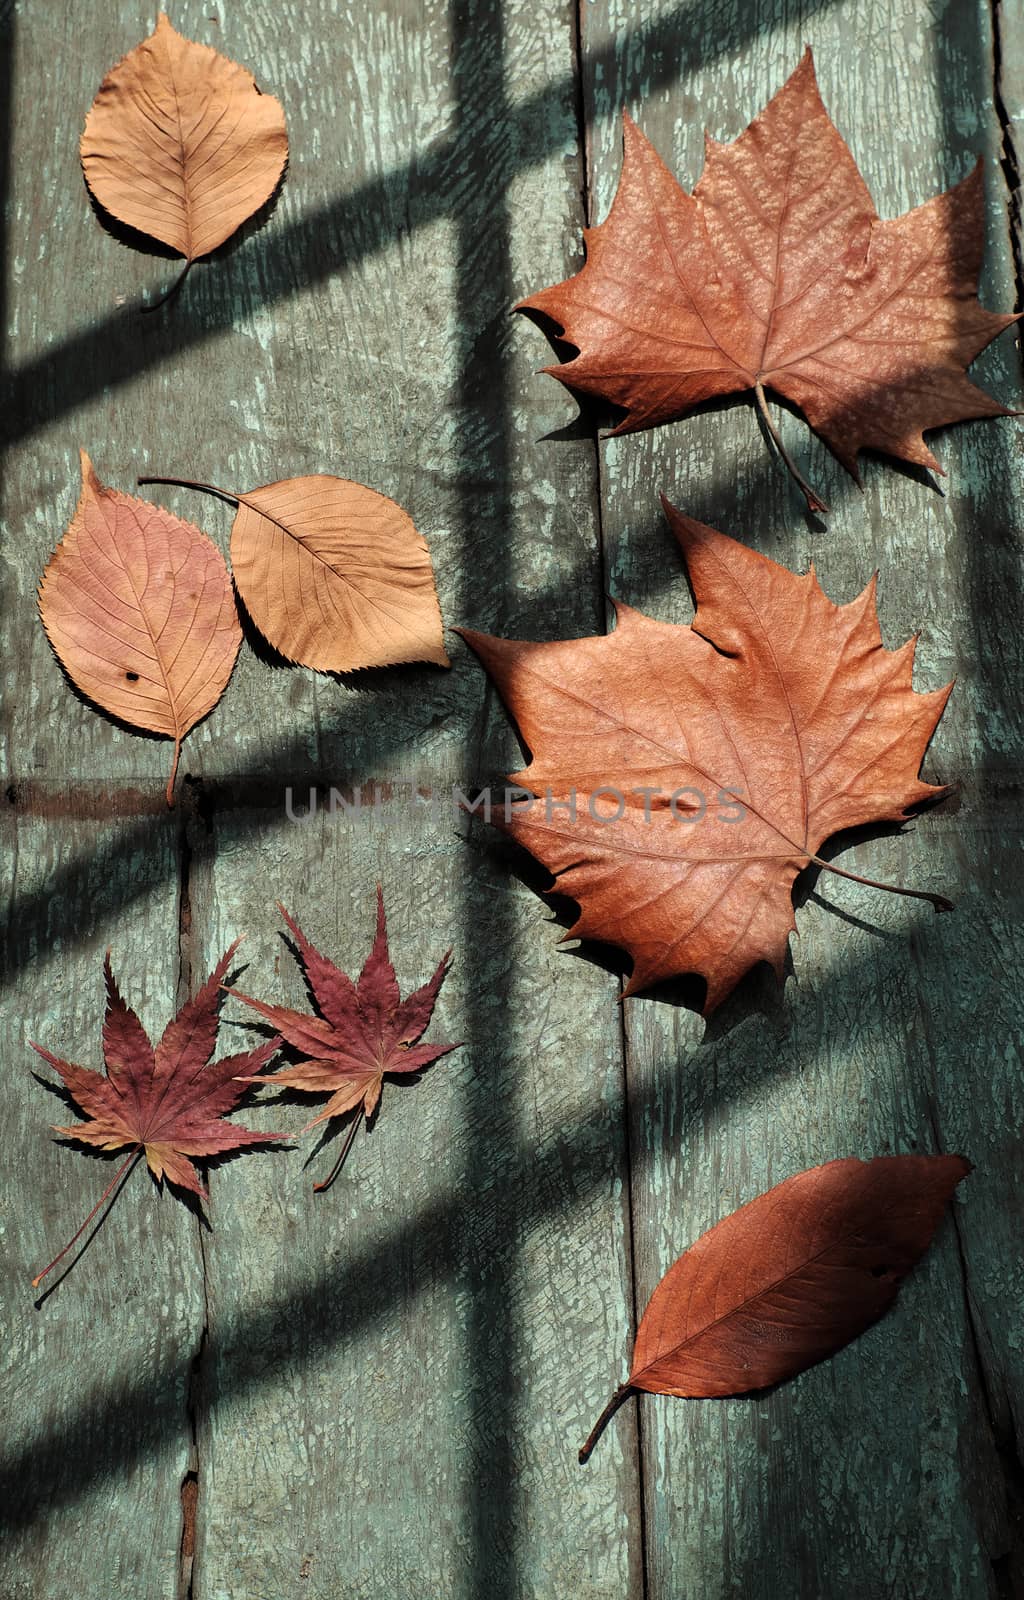 Fall background with dried maple leaf on wood background and vintage color, shadows of window on leaves make art shape